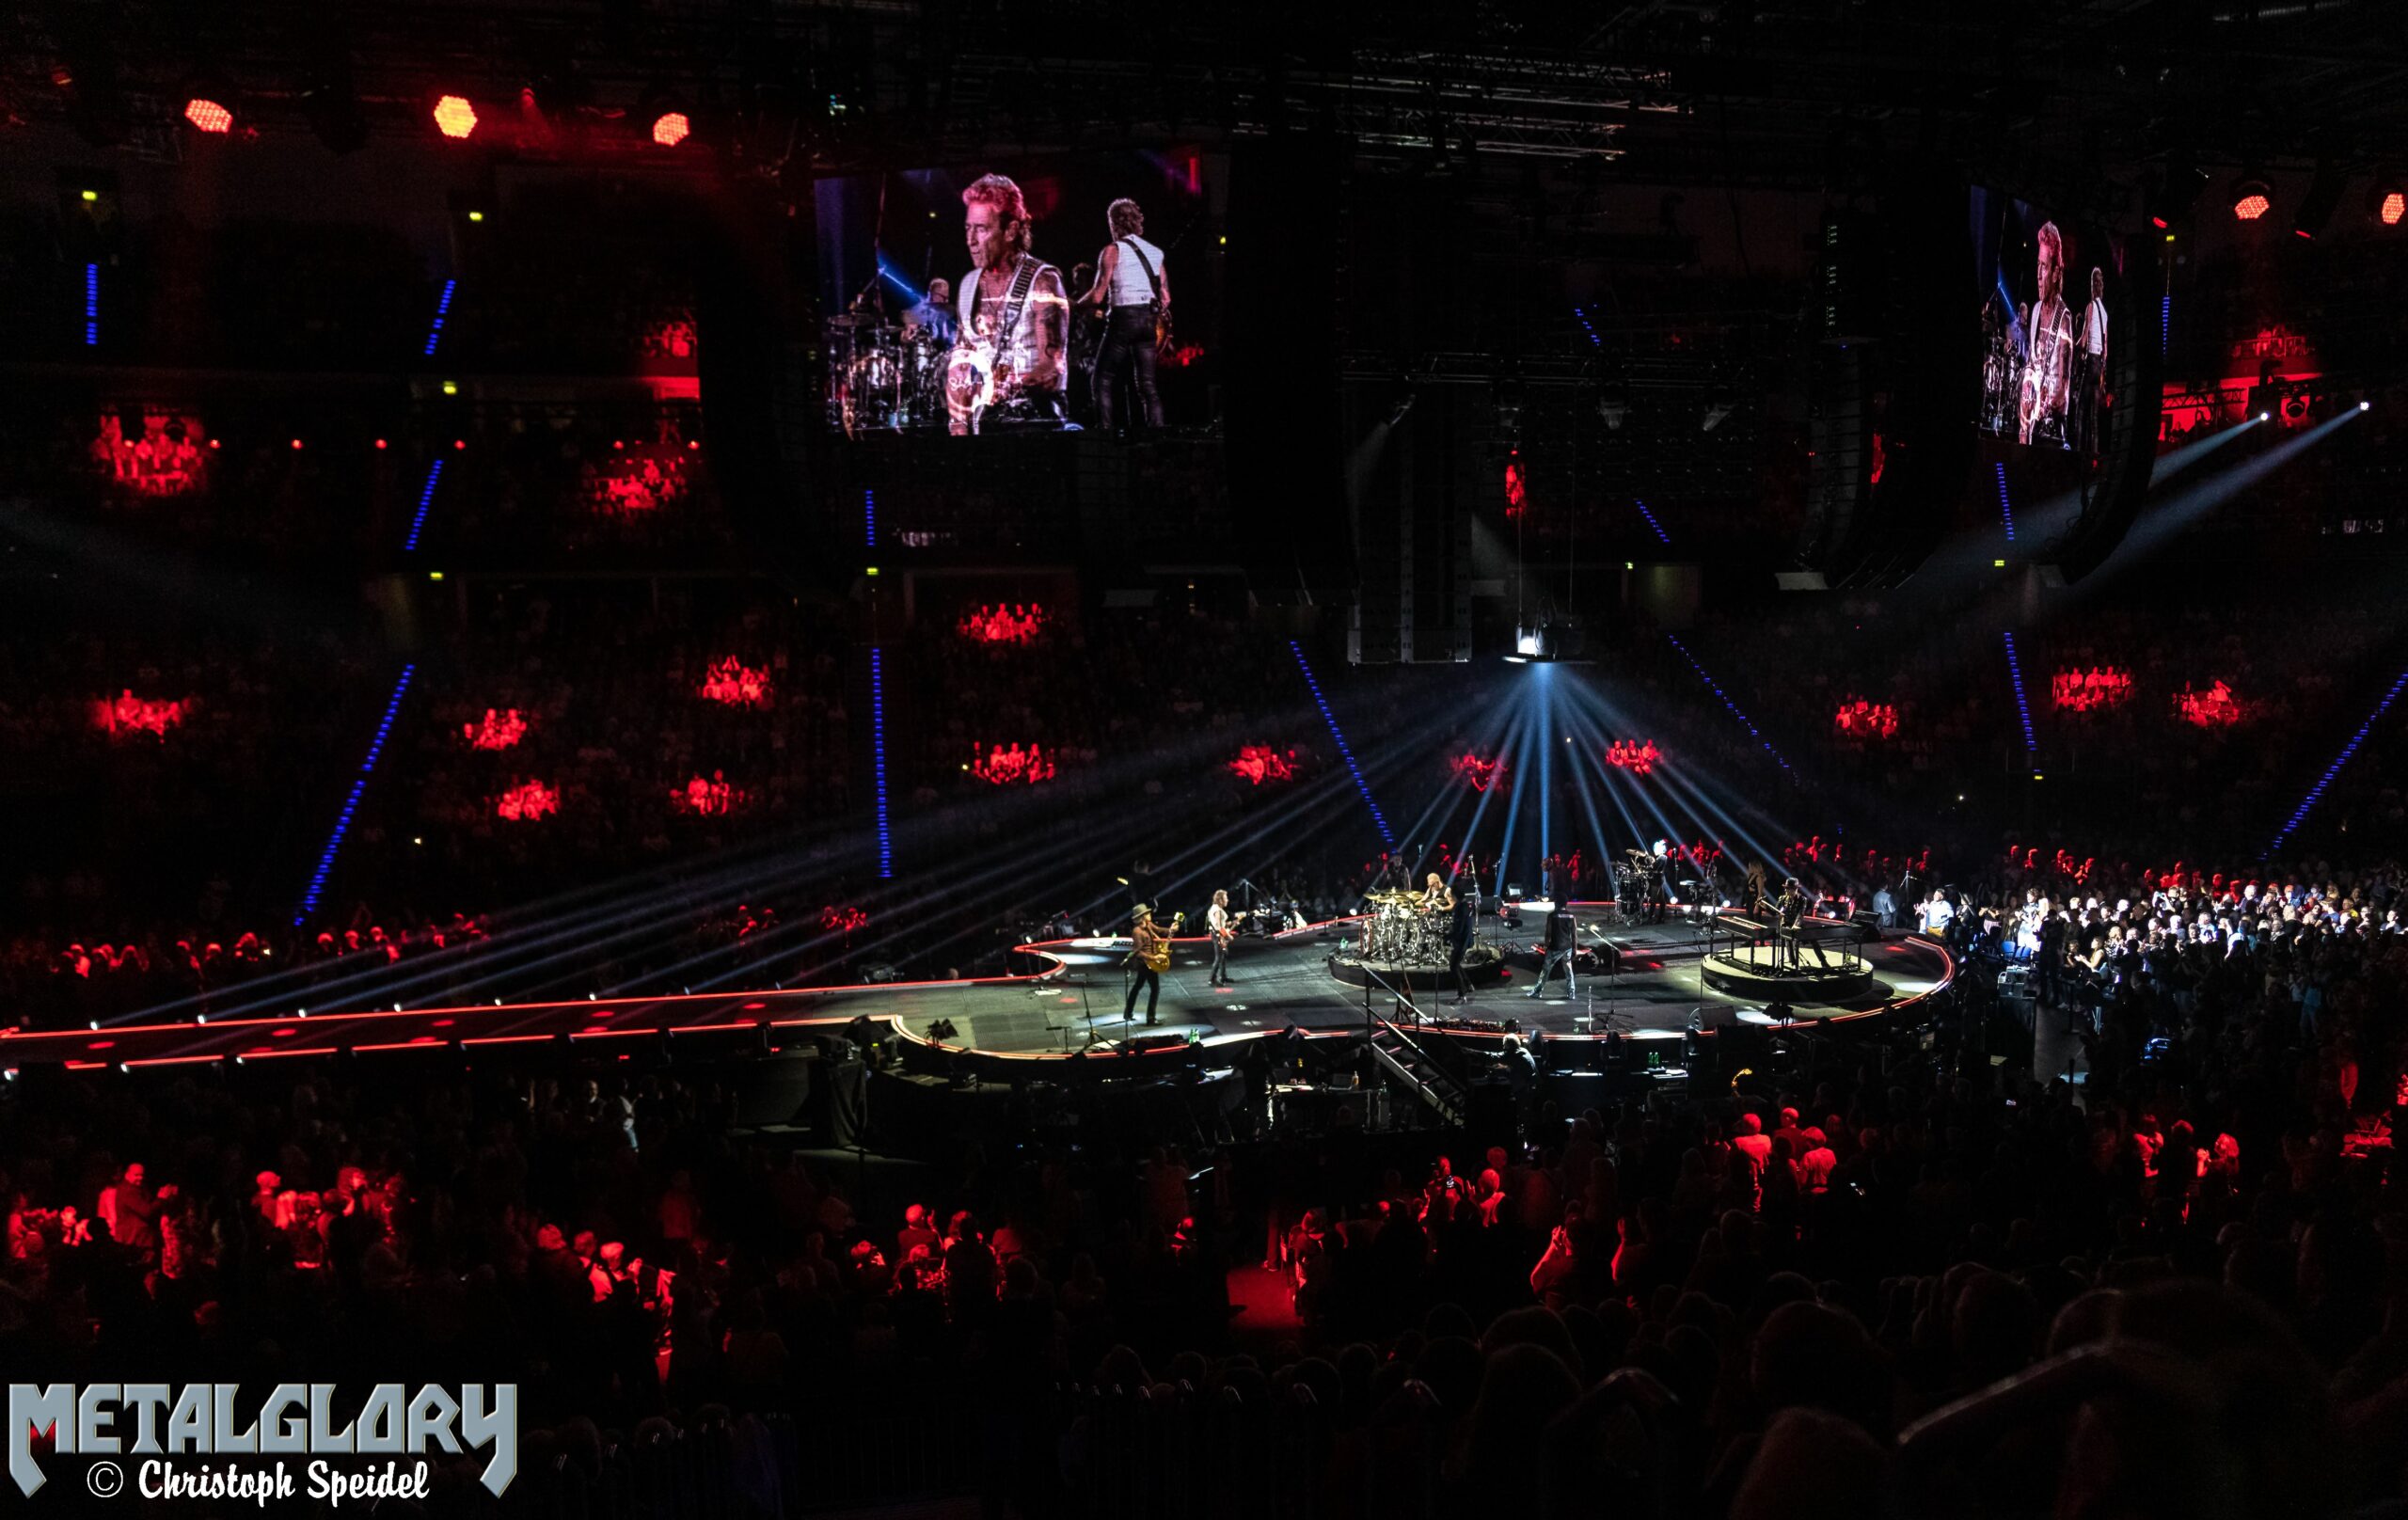 Peter Maffay “So Weit Tour 2022”, 13.09.2022, ZAG-Arena, Hannover